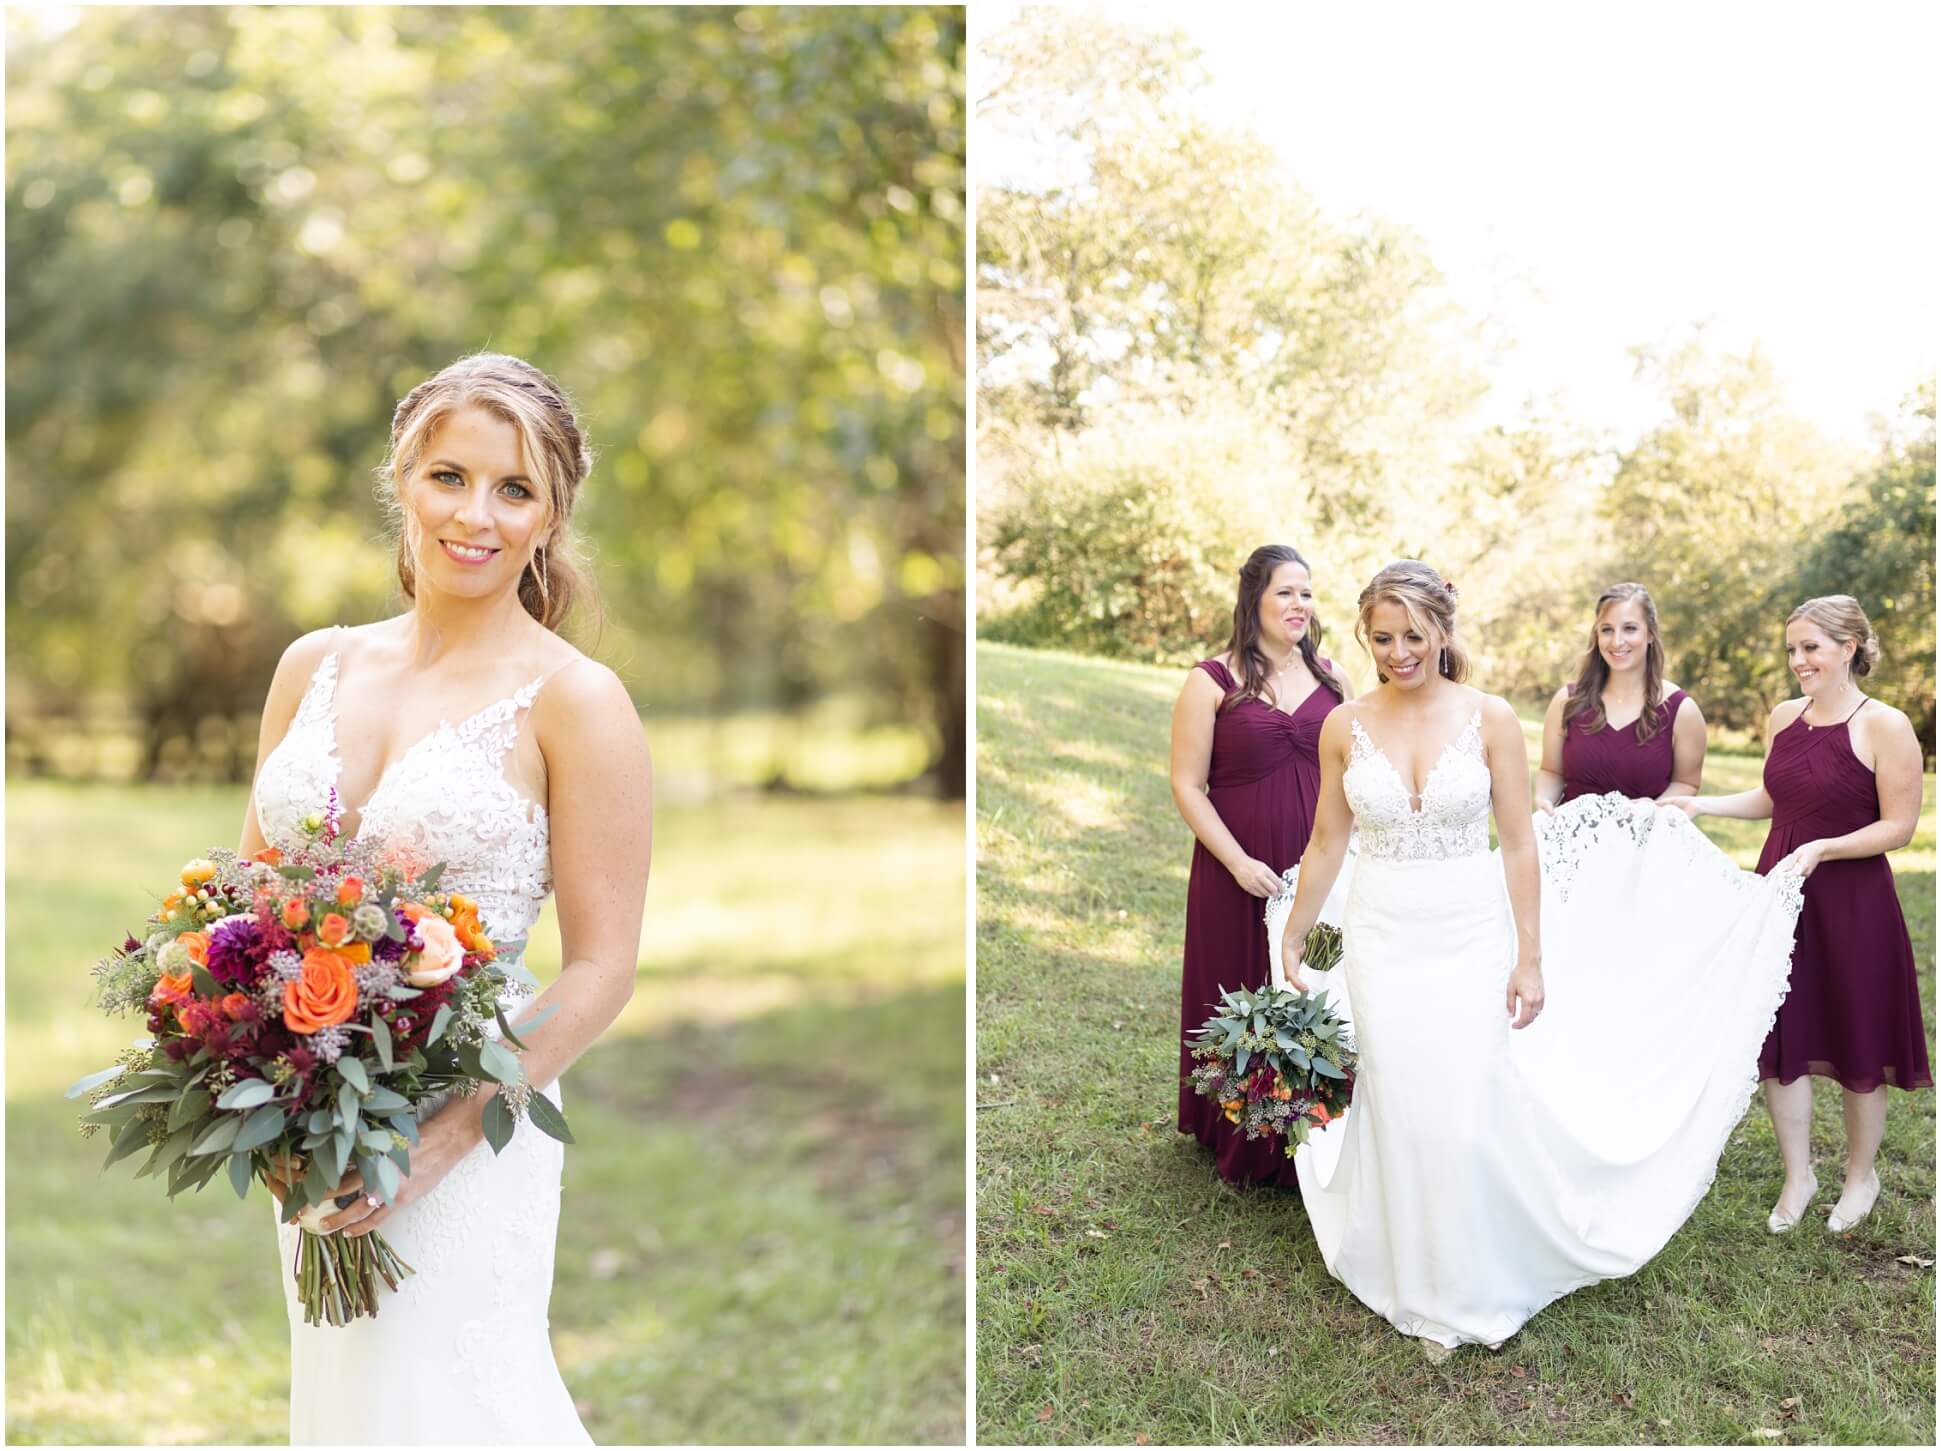 BRIDAL PORTRAITS BY MAEWOOD PHOTOGRAPHY